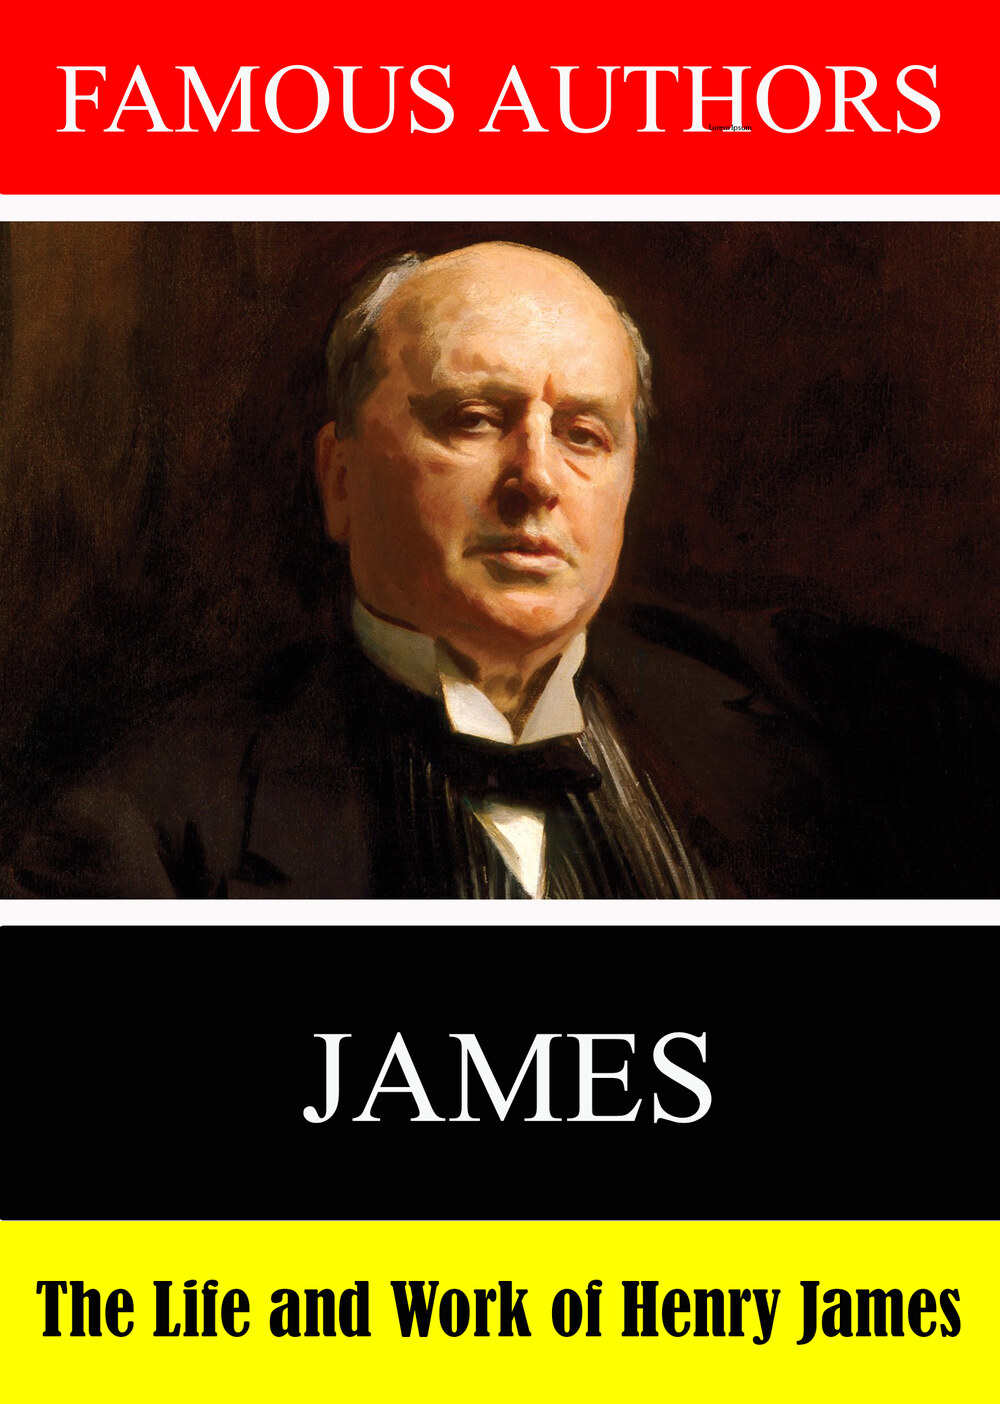 L7889 - Famous Authors: The Life and Work Henry James